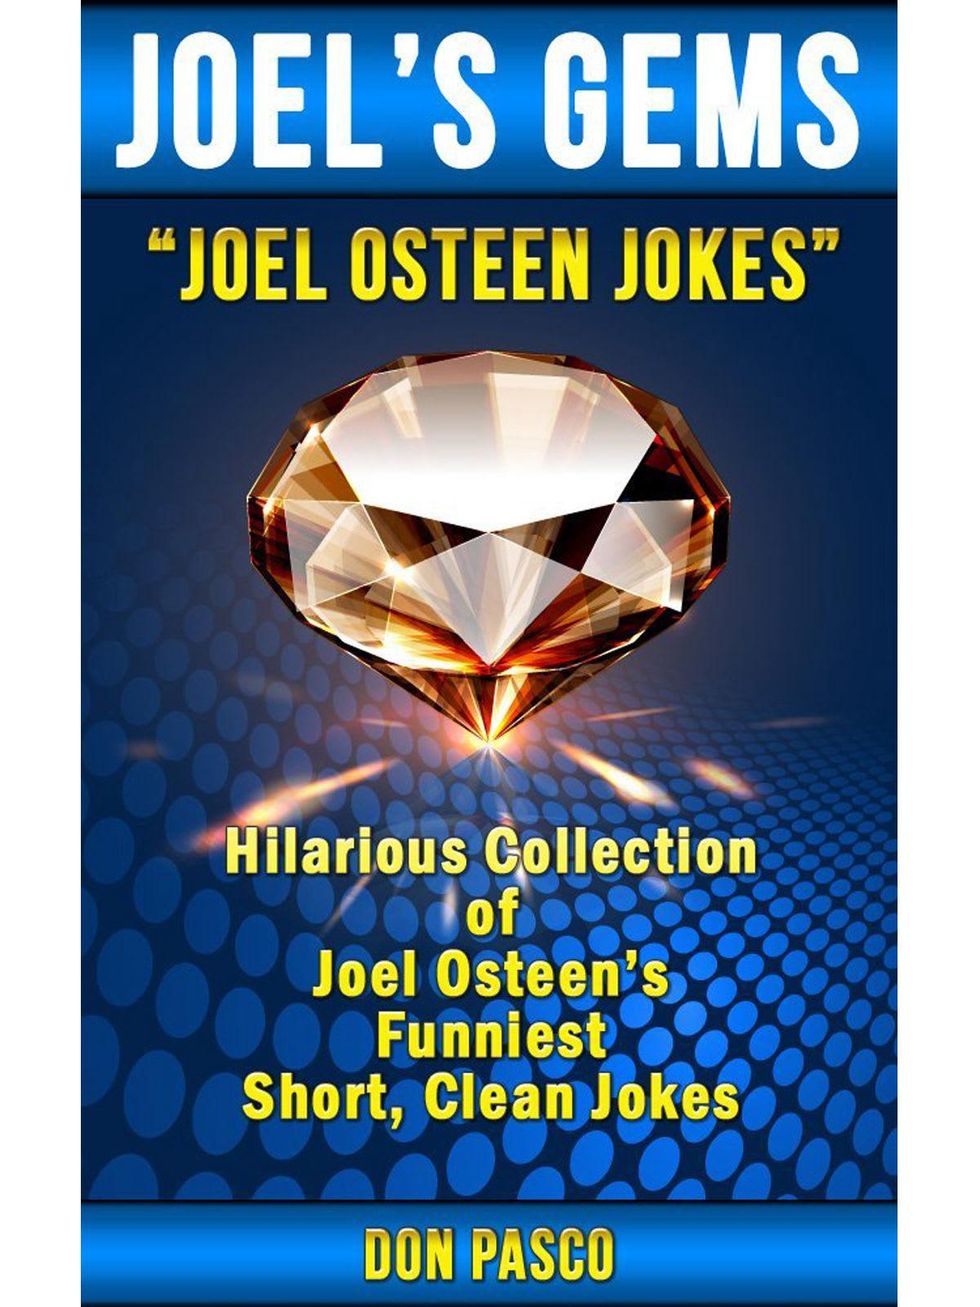 Houston pastor and comedian Joel Osteen is the subject of a new  unauthorized joke book. - CultureMap Dallas